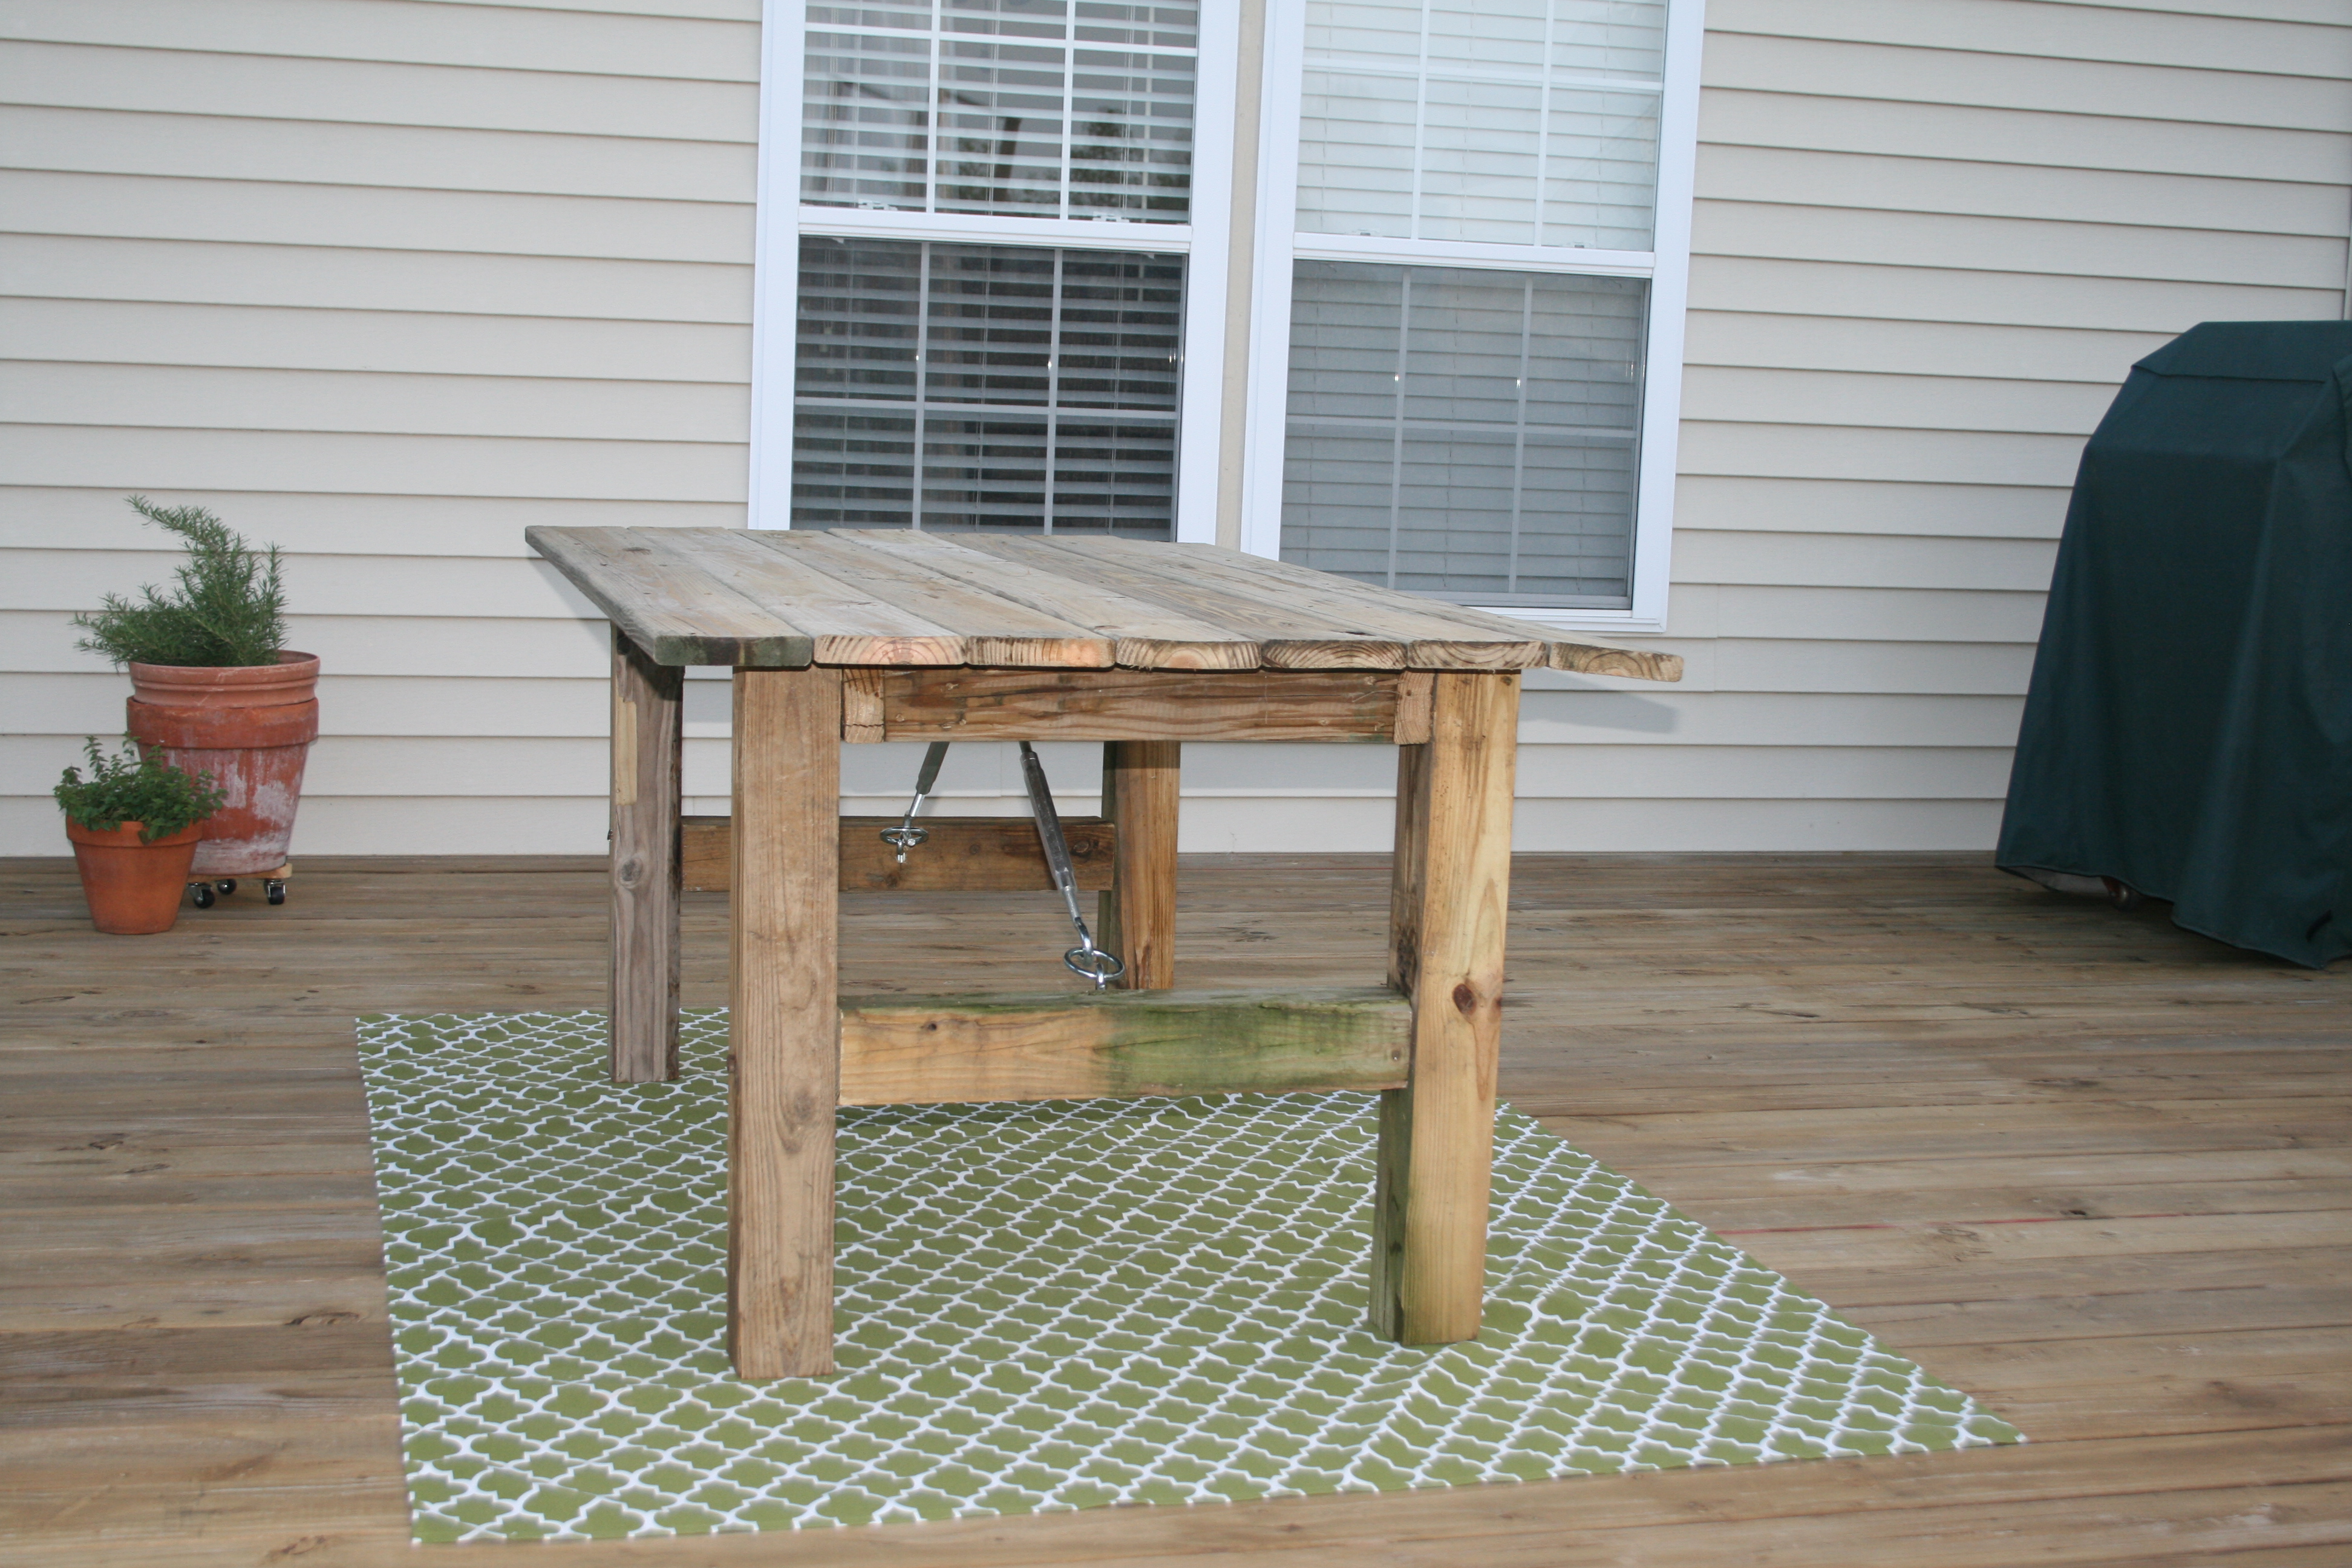 Remodelaholic | How To Build A Rustic Outdoor Dining Table: Guest ...